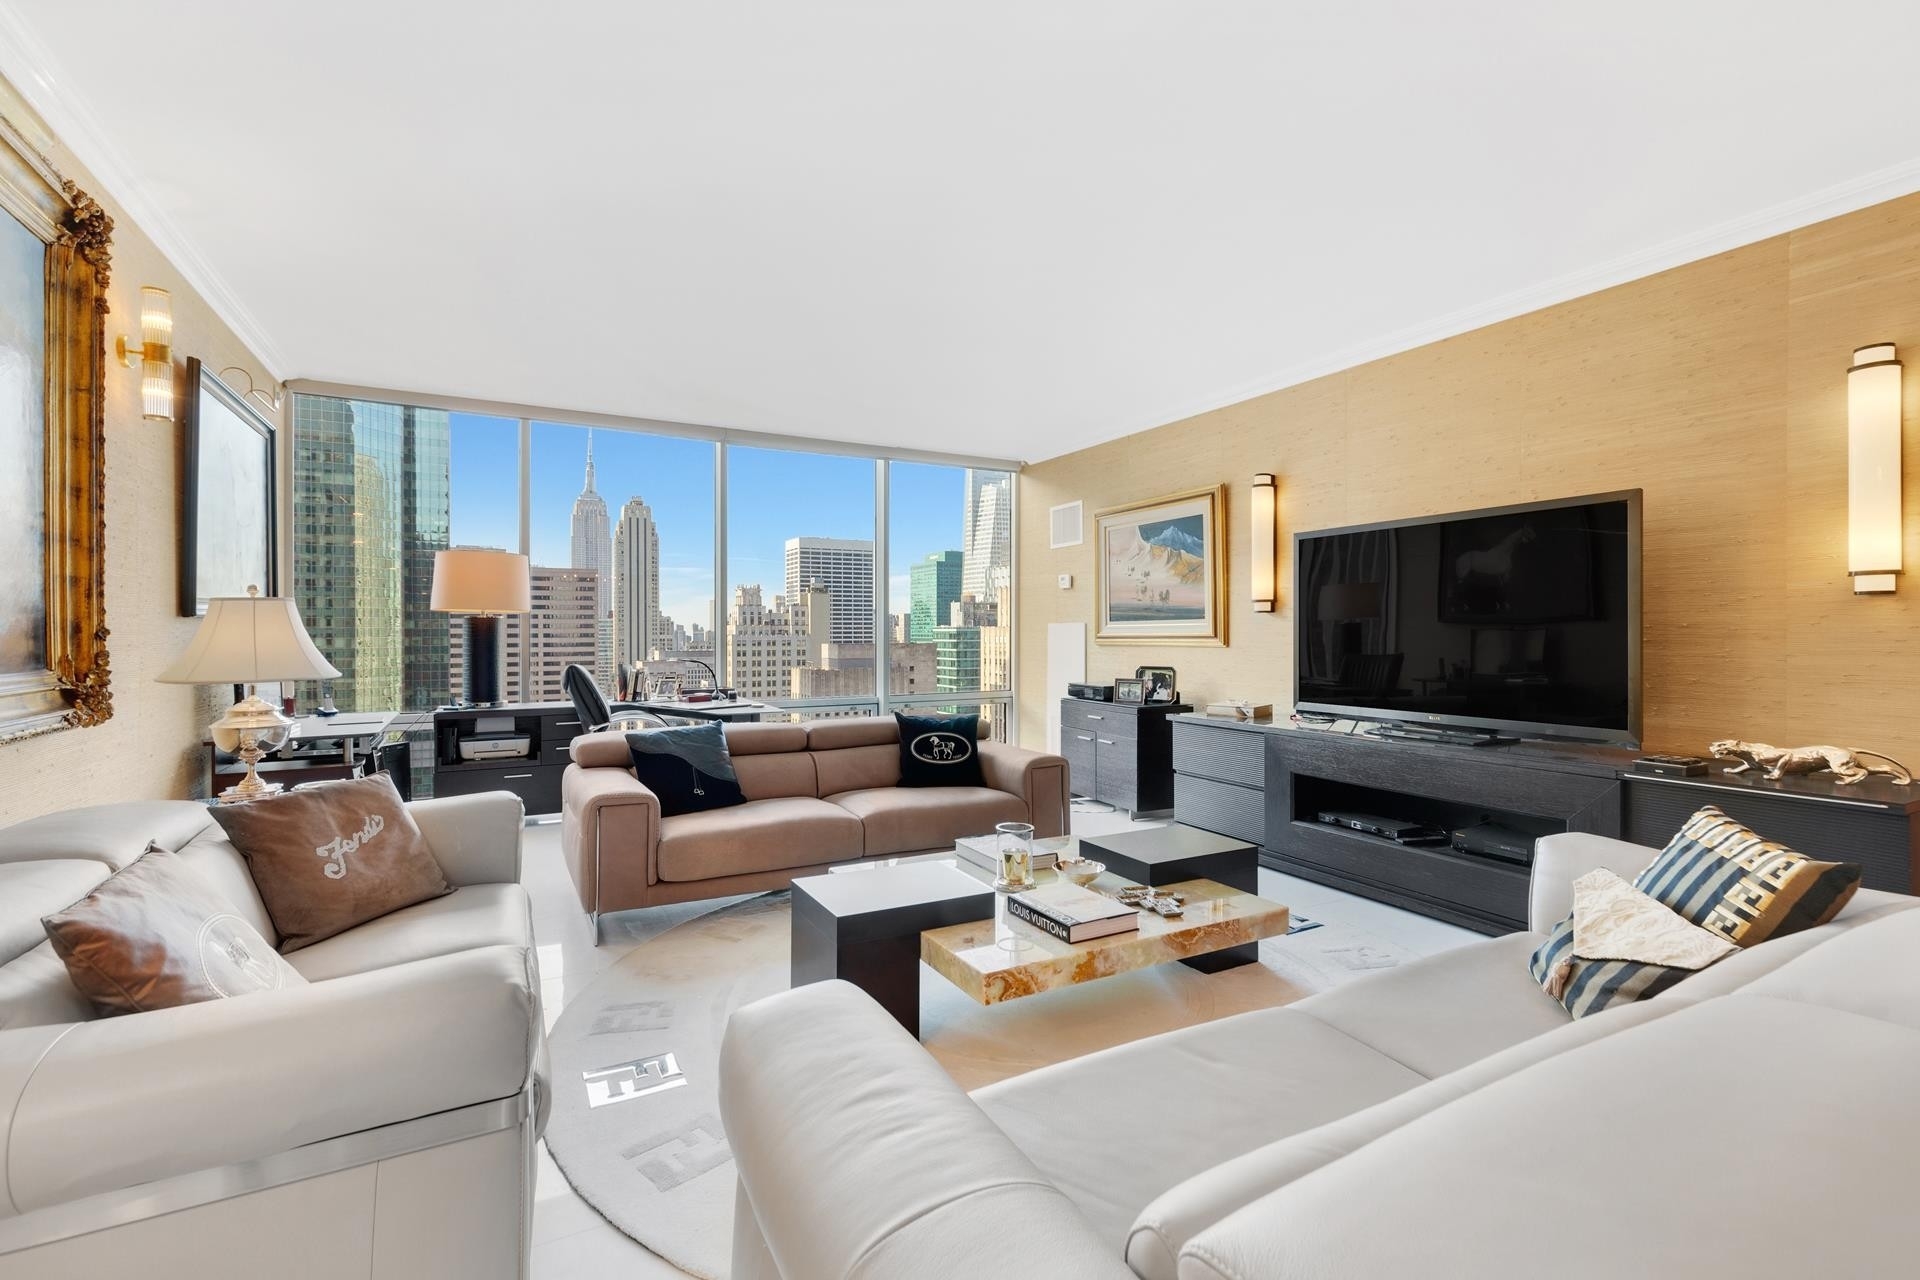 Condominium for Sale at Olympic Tower, 641 FIFTH AVE, 30F Midtown East, New York, NY 10022